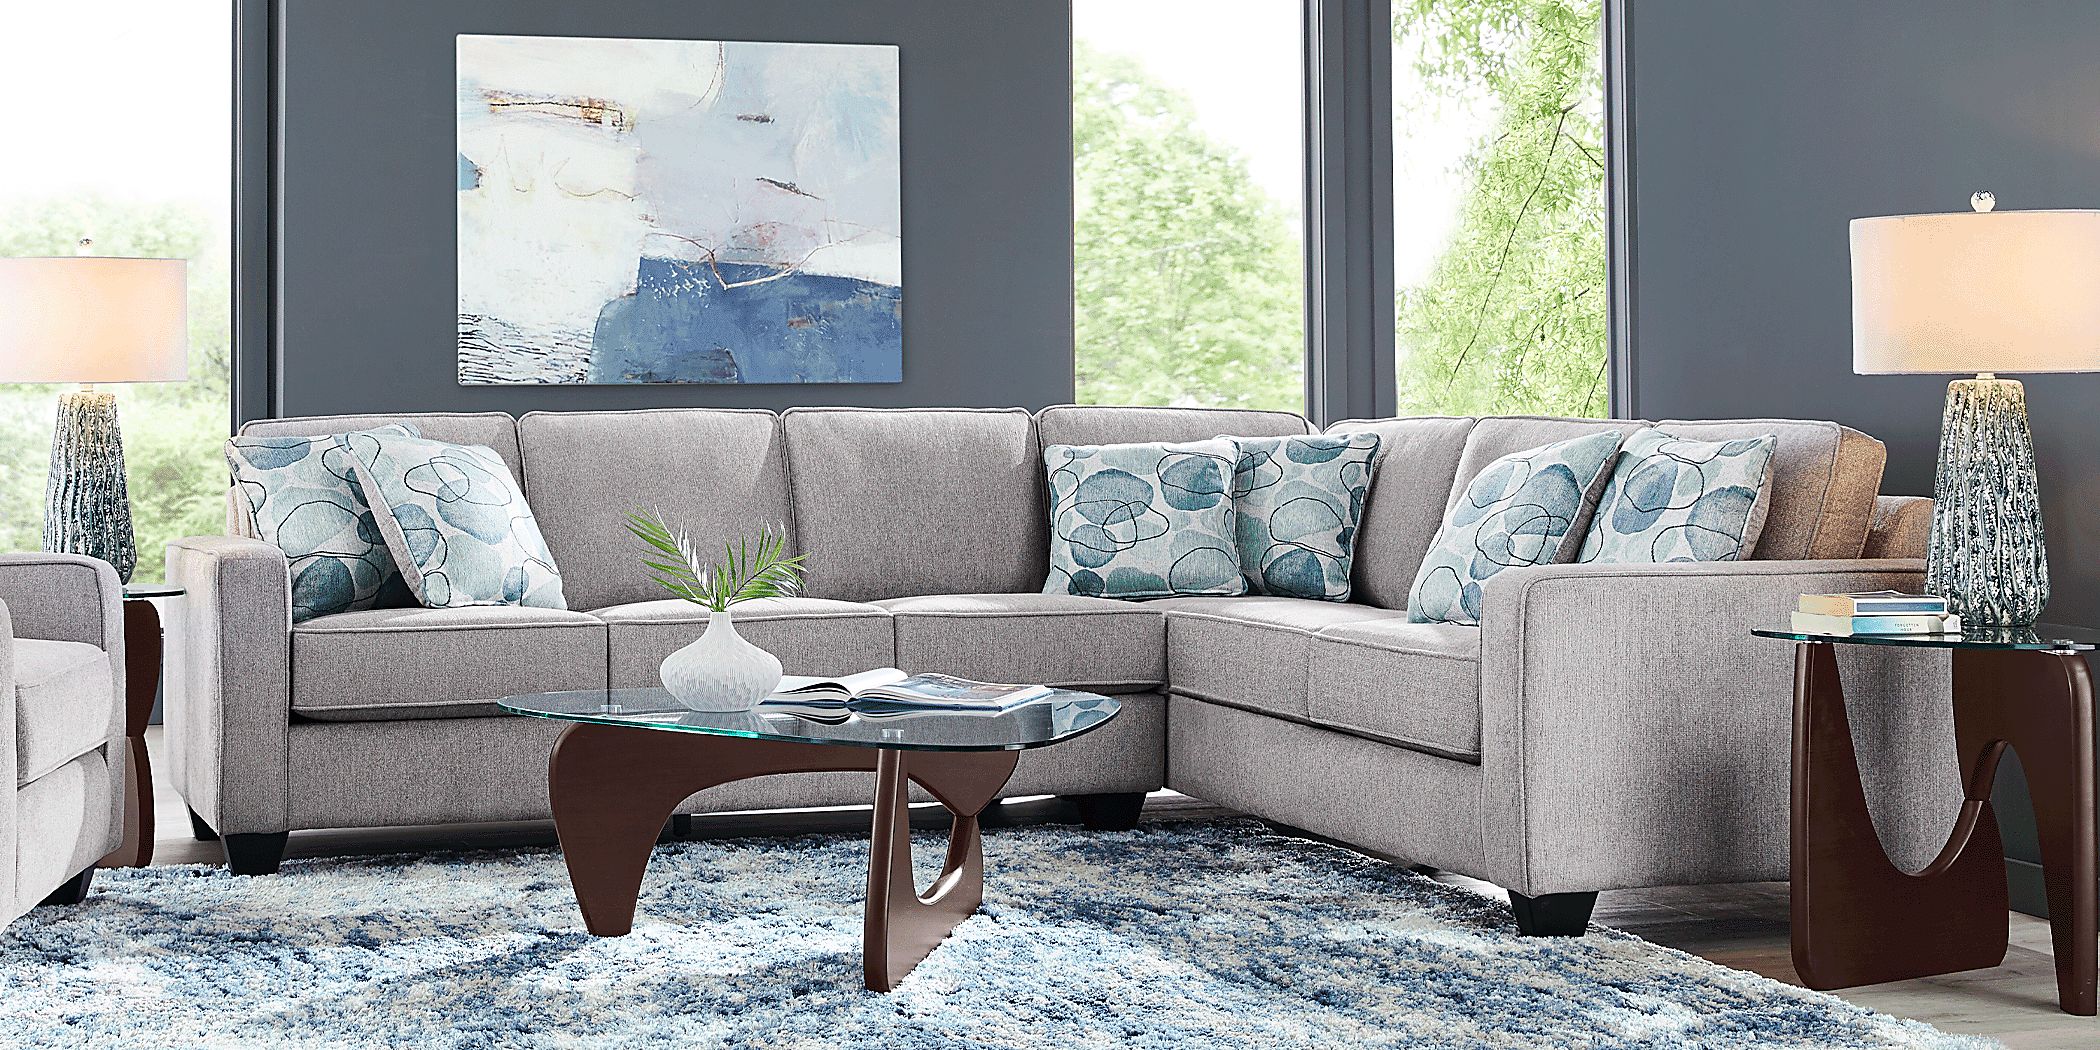 Alanis Bay Gray 6 Pc Sectional Living Room